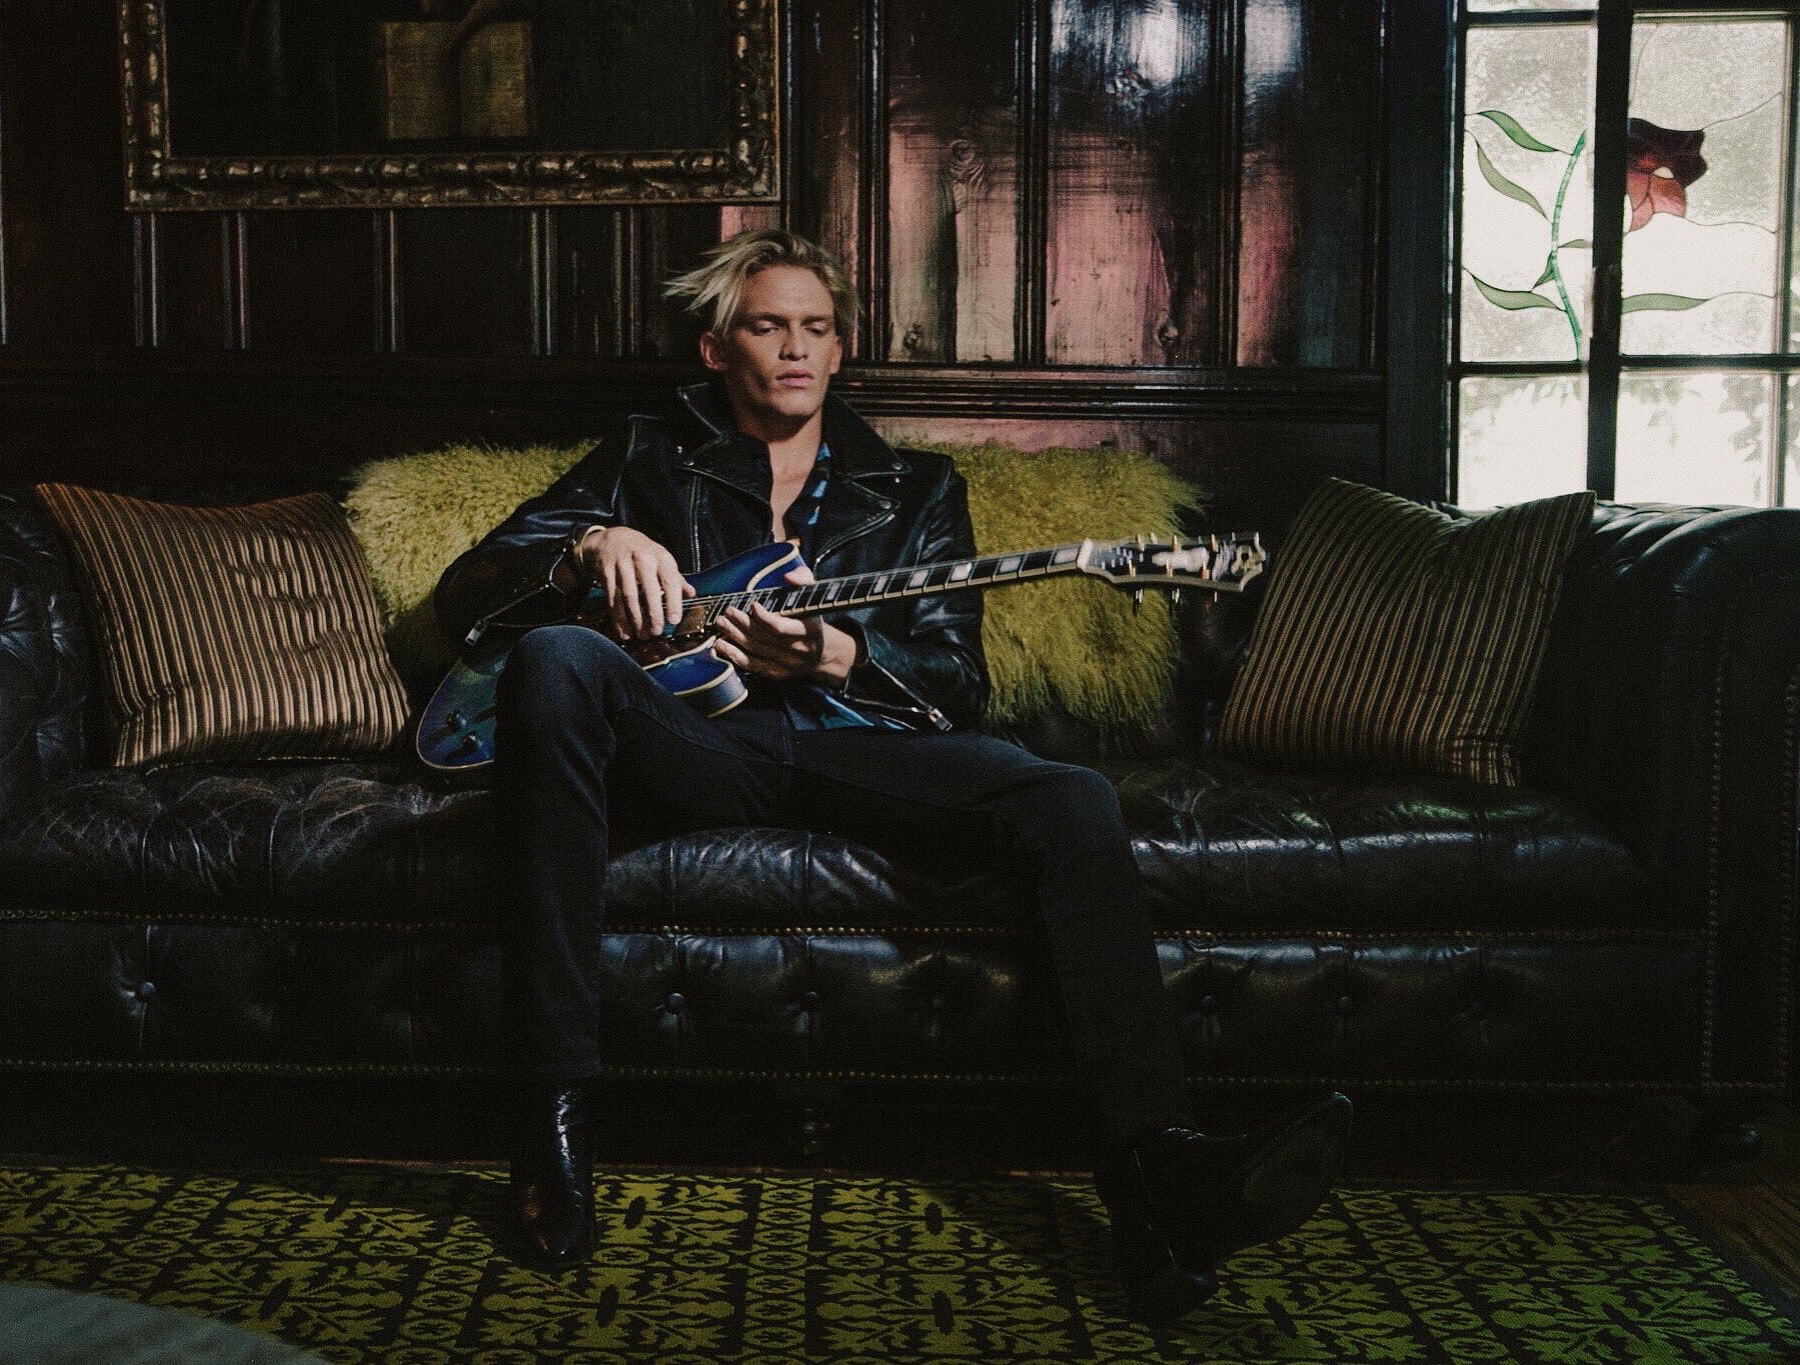 A Q&A with Cody Simpson about Guitar Center’s Singer-Songwriter 6